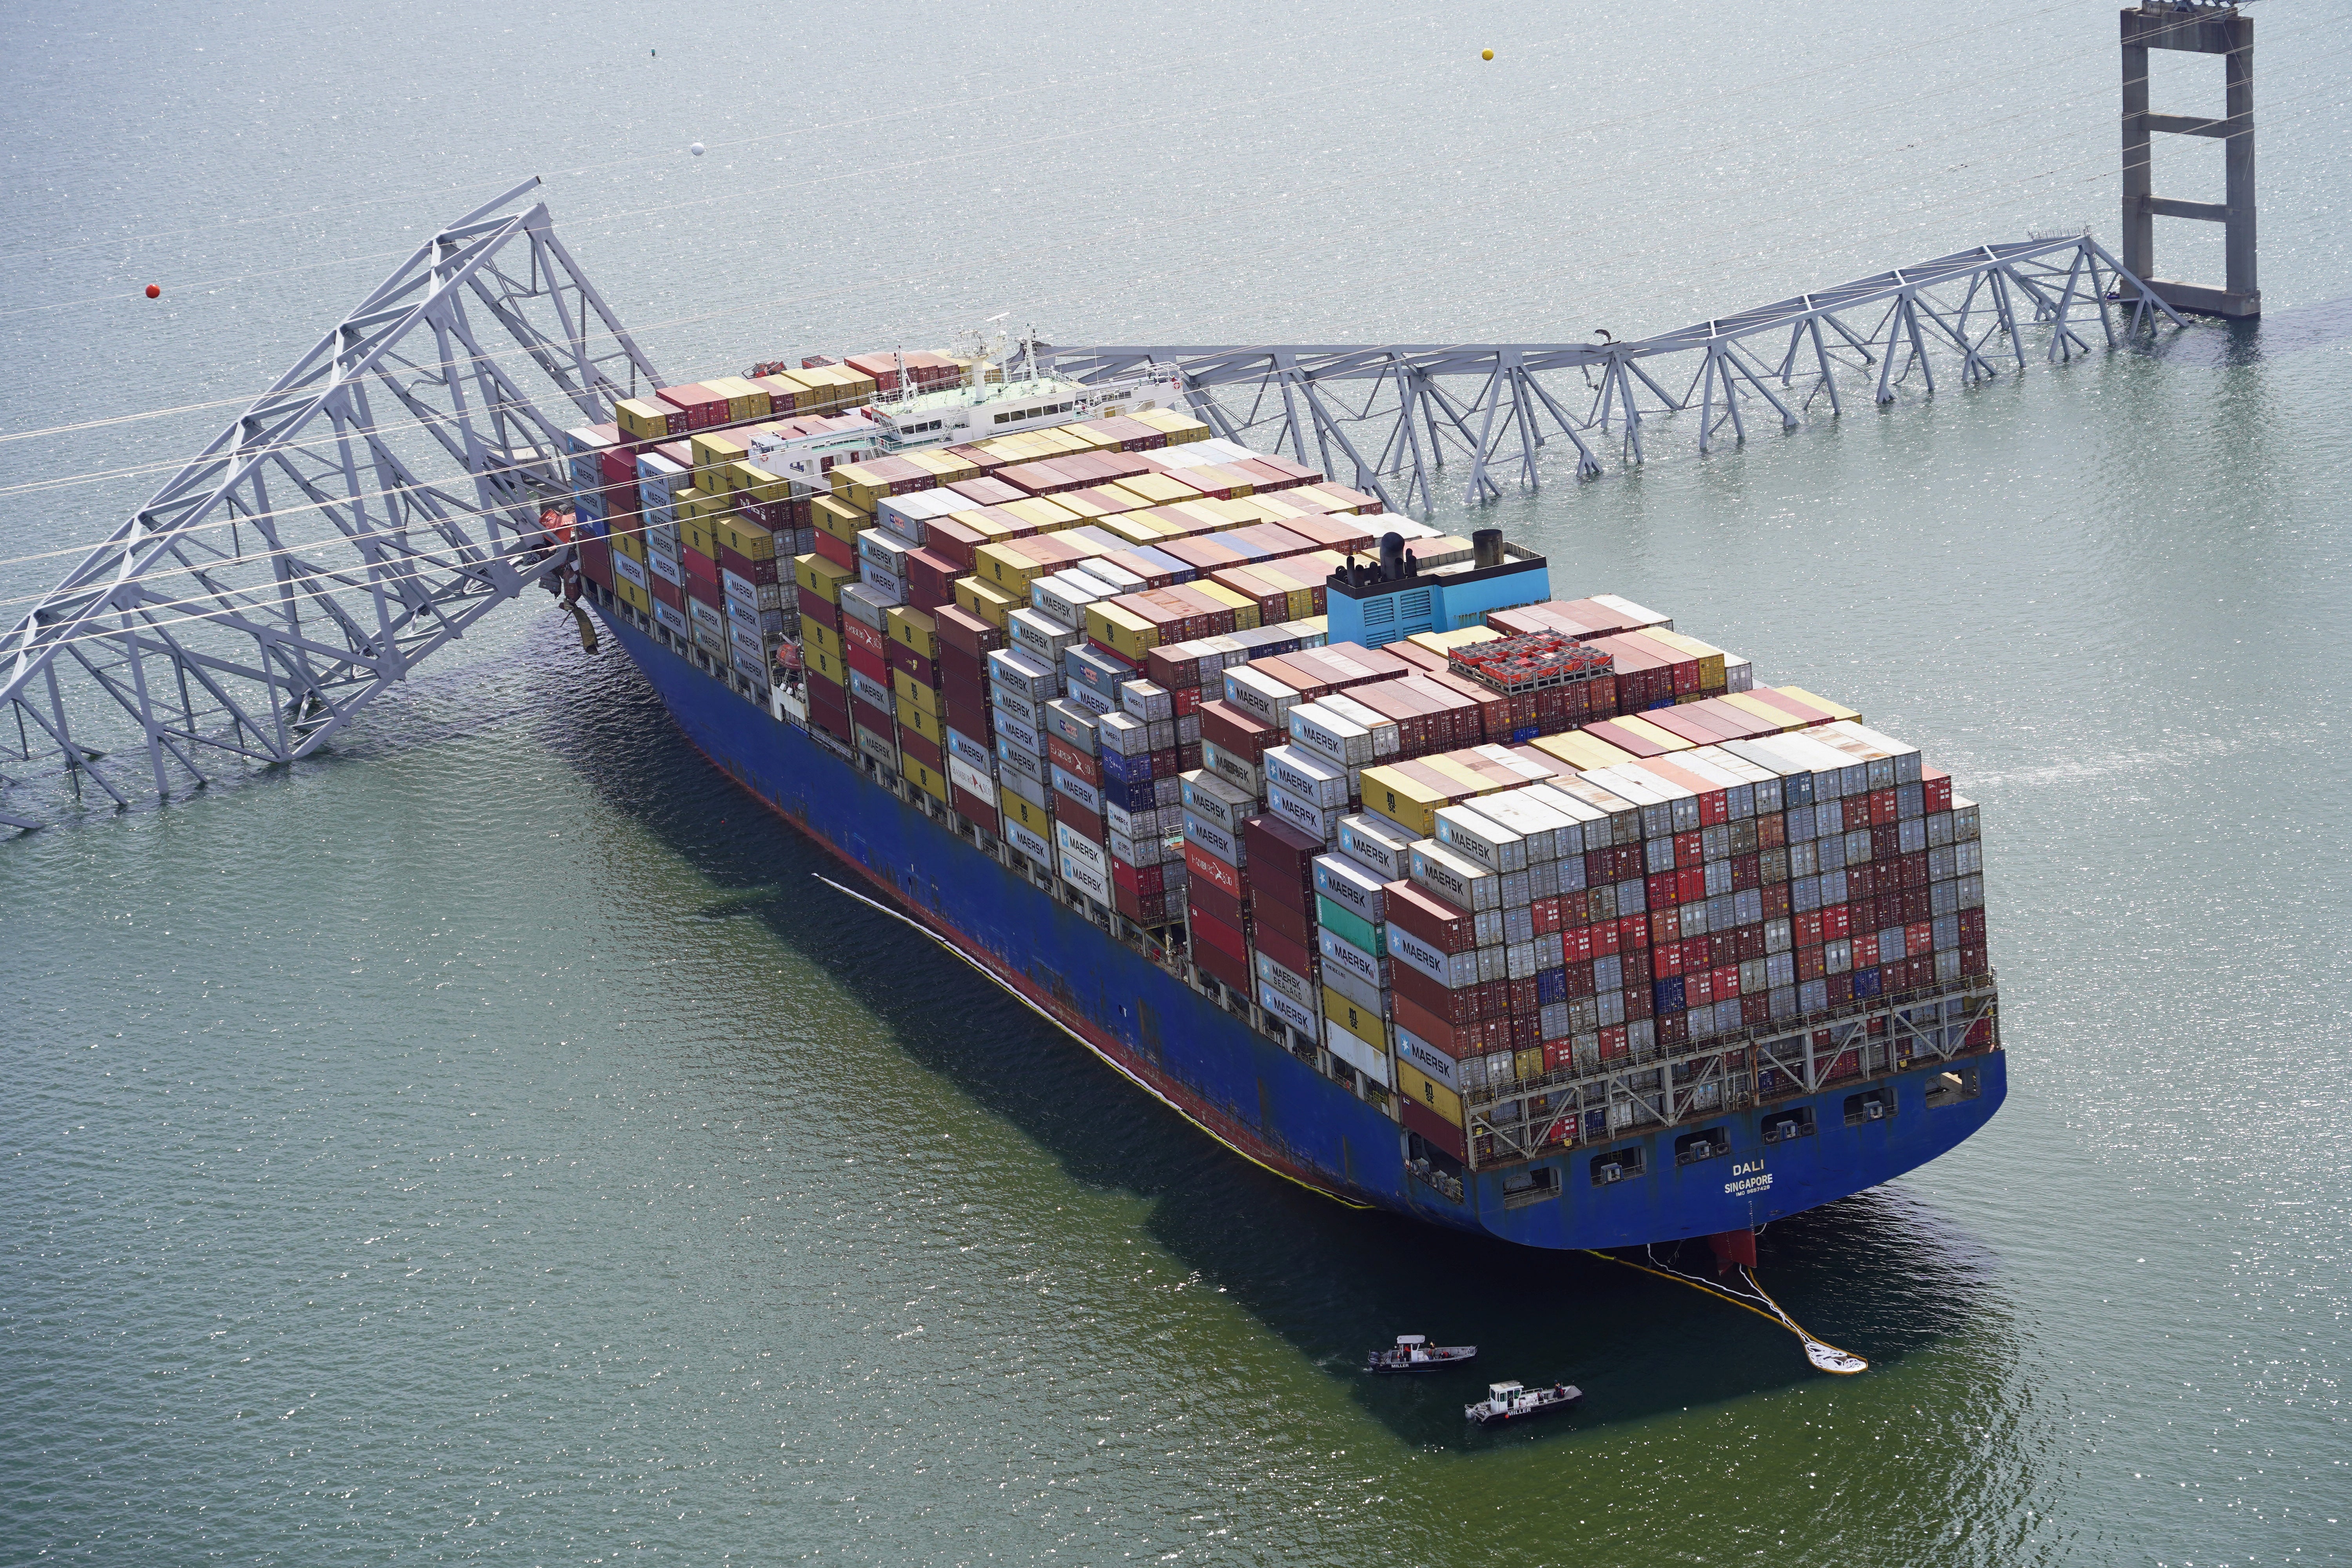 The 1,000ft container ship Dali was an hour into its voyage to Sri Lanka when it struck the bridge